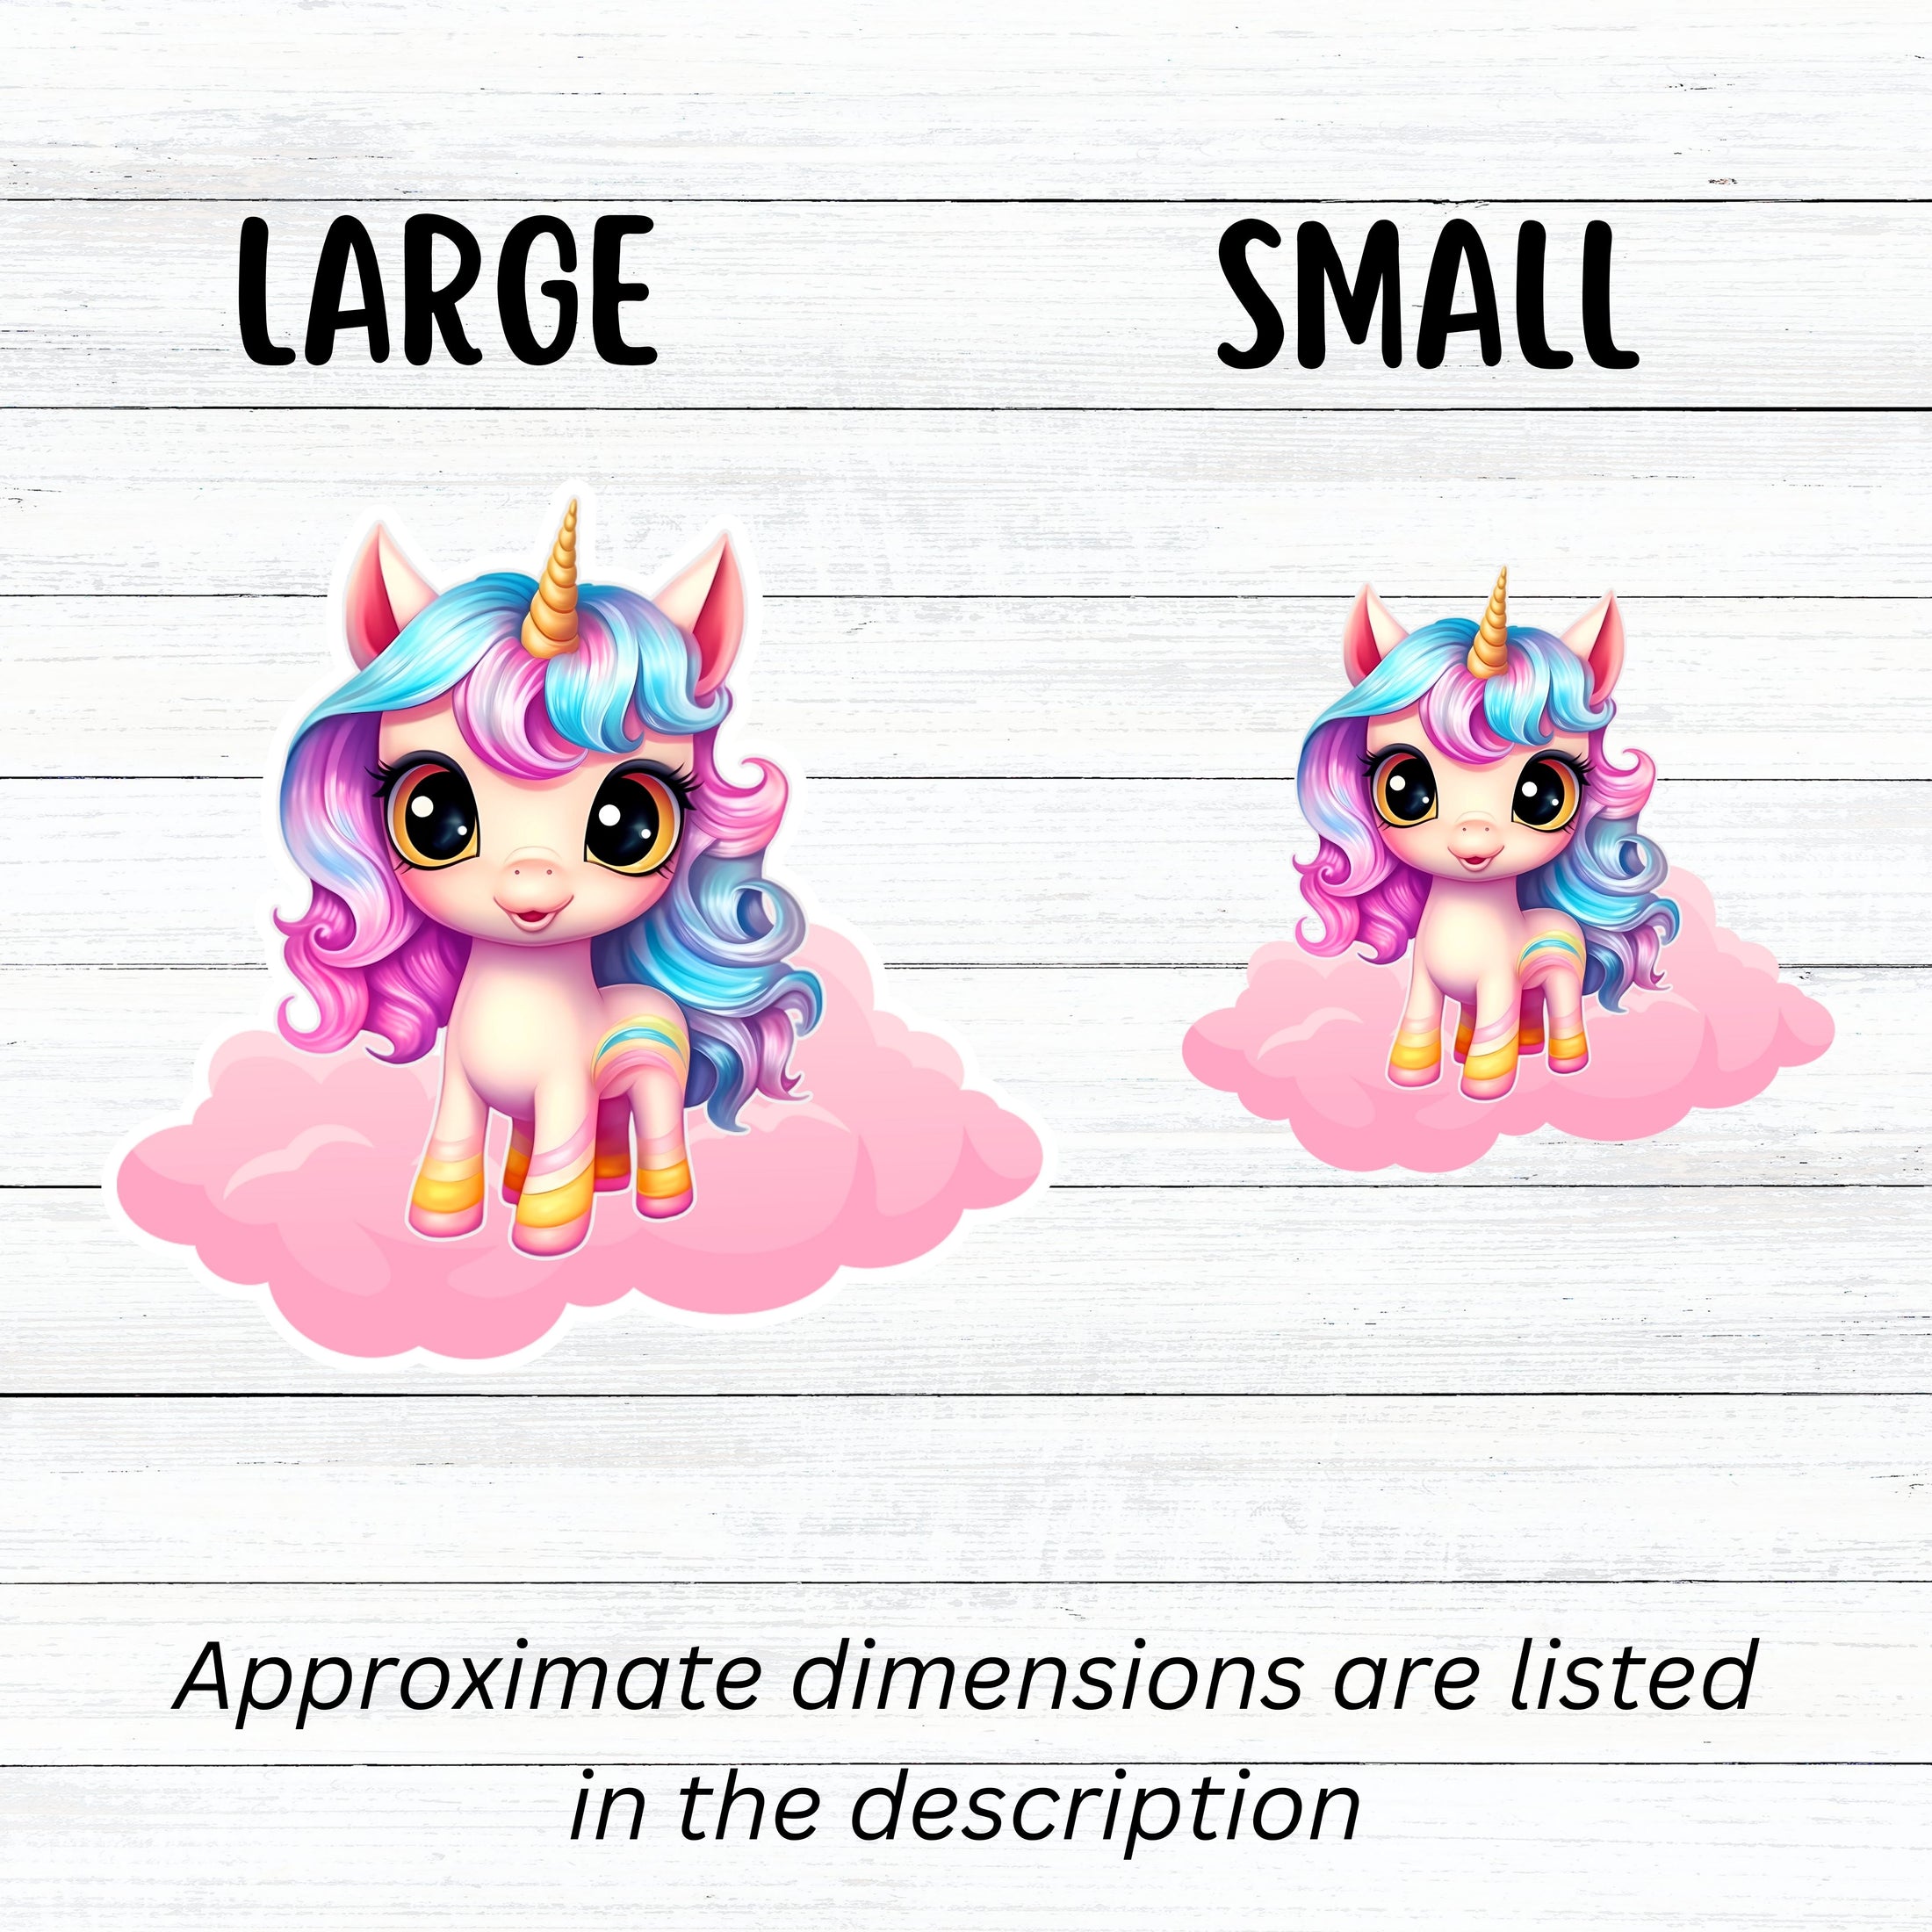 This image shows large and small pink chibi unicorn stickers next to each other.